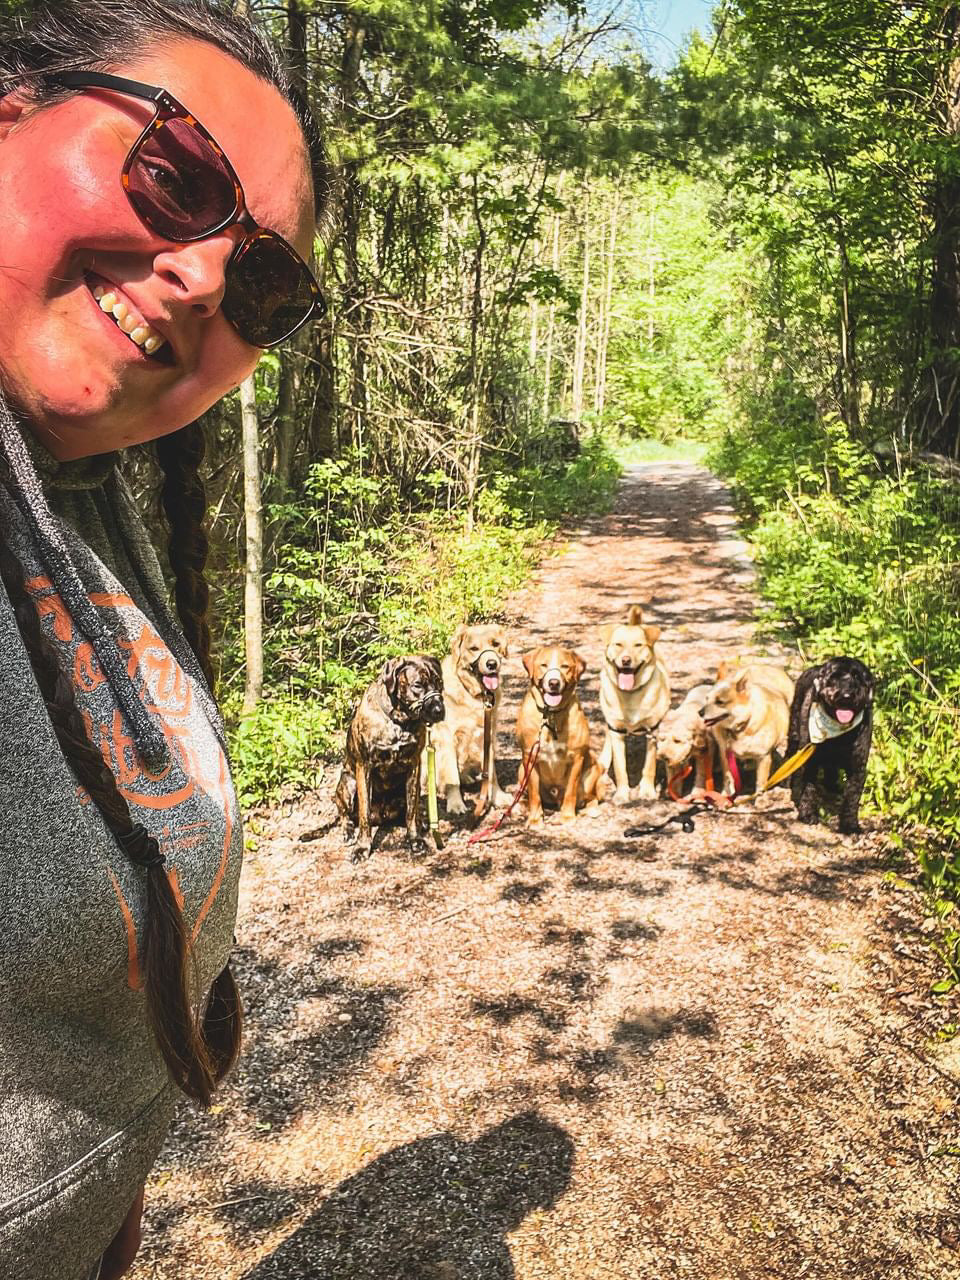 There is a group of leashed dogs on a forest path in the summertime. Their dog walker is on the left of the frame smiling and leaning towards them and she takes a selfie with the dogs in the background.